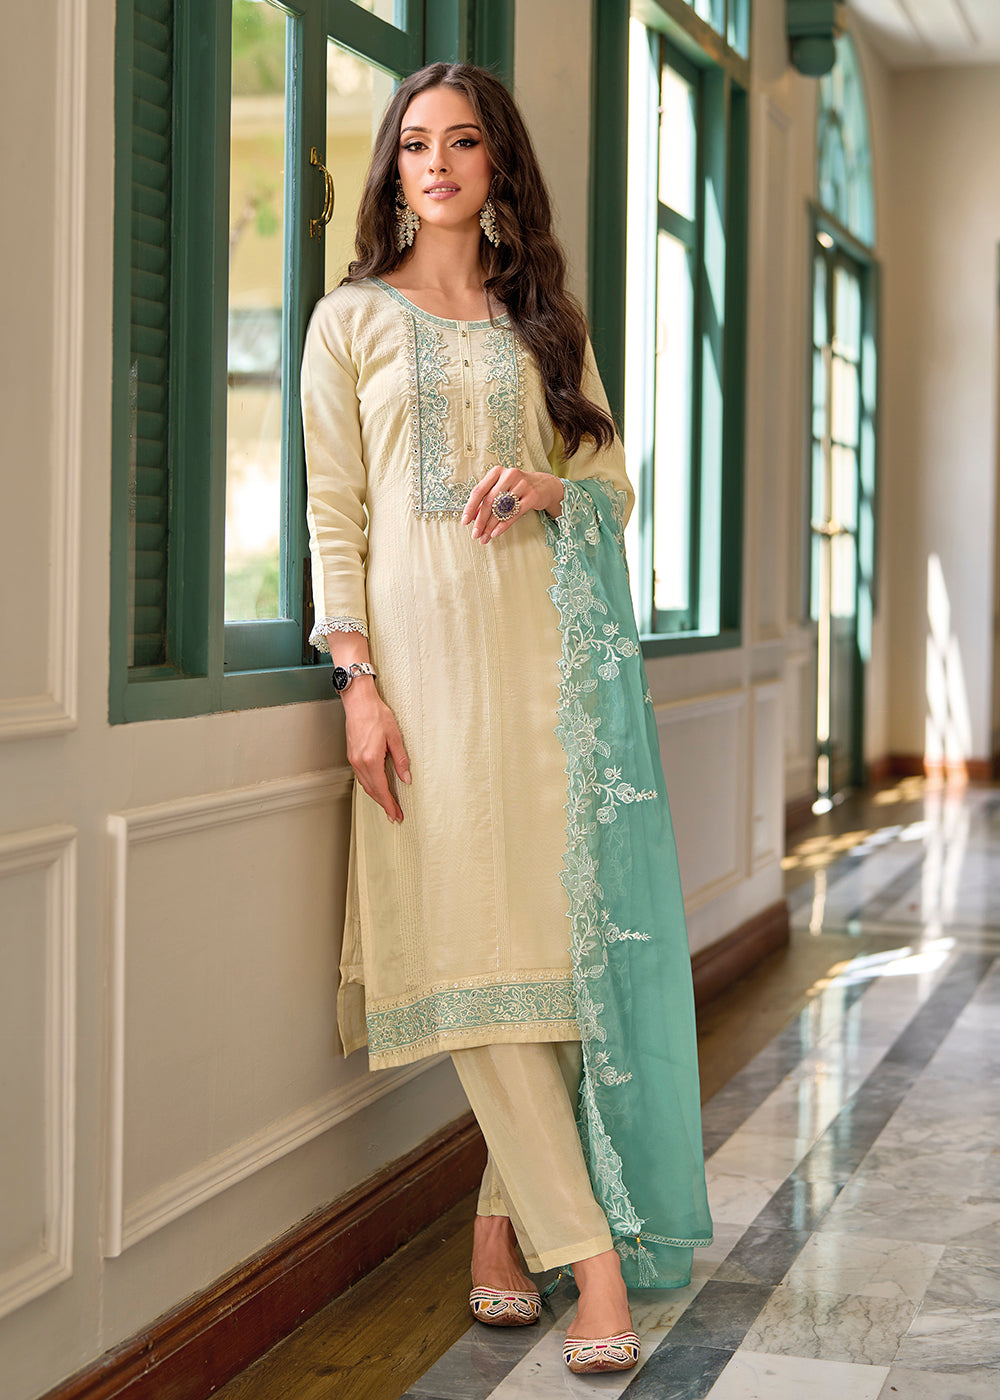 Buy Now Festive Organza Cream Embroidered Salwar Kameez Online in USA, UK, Canada, Germany, Australia & Worldwide at Empress Clothing.